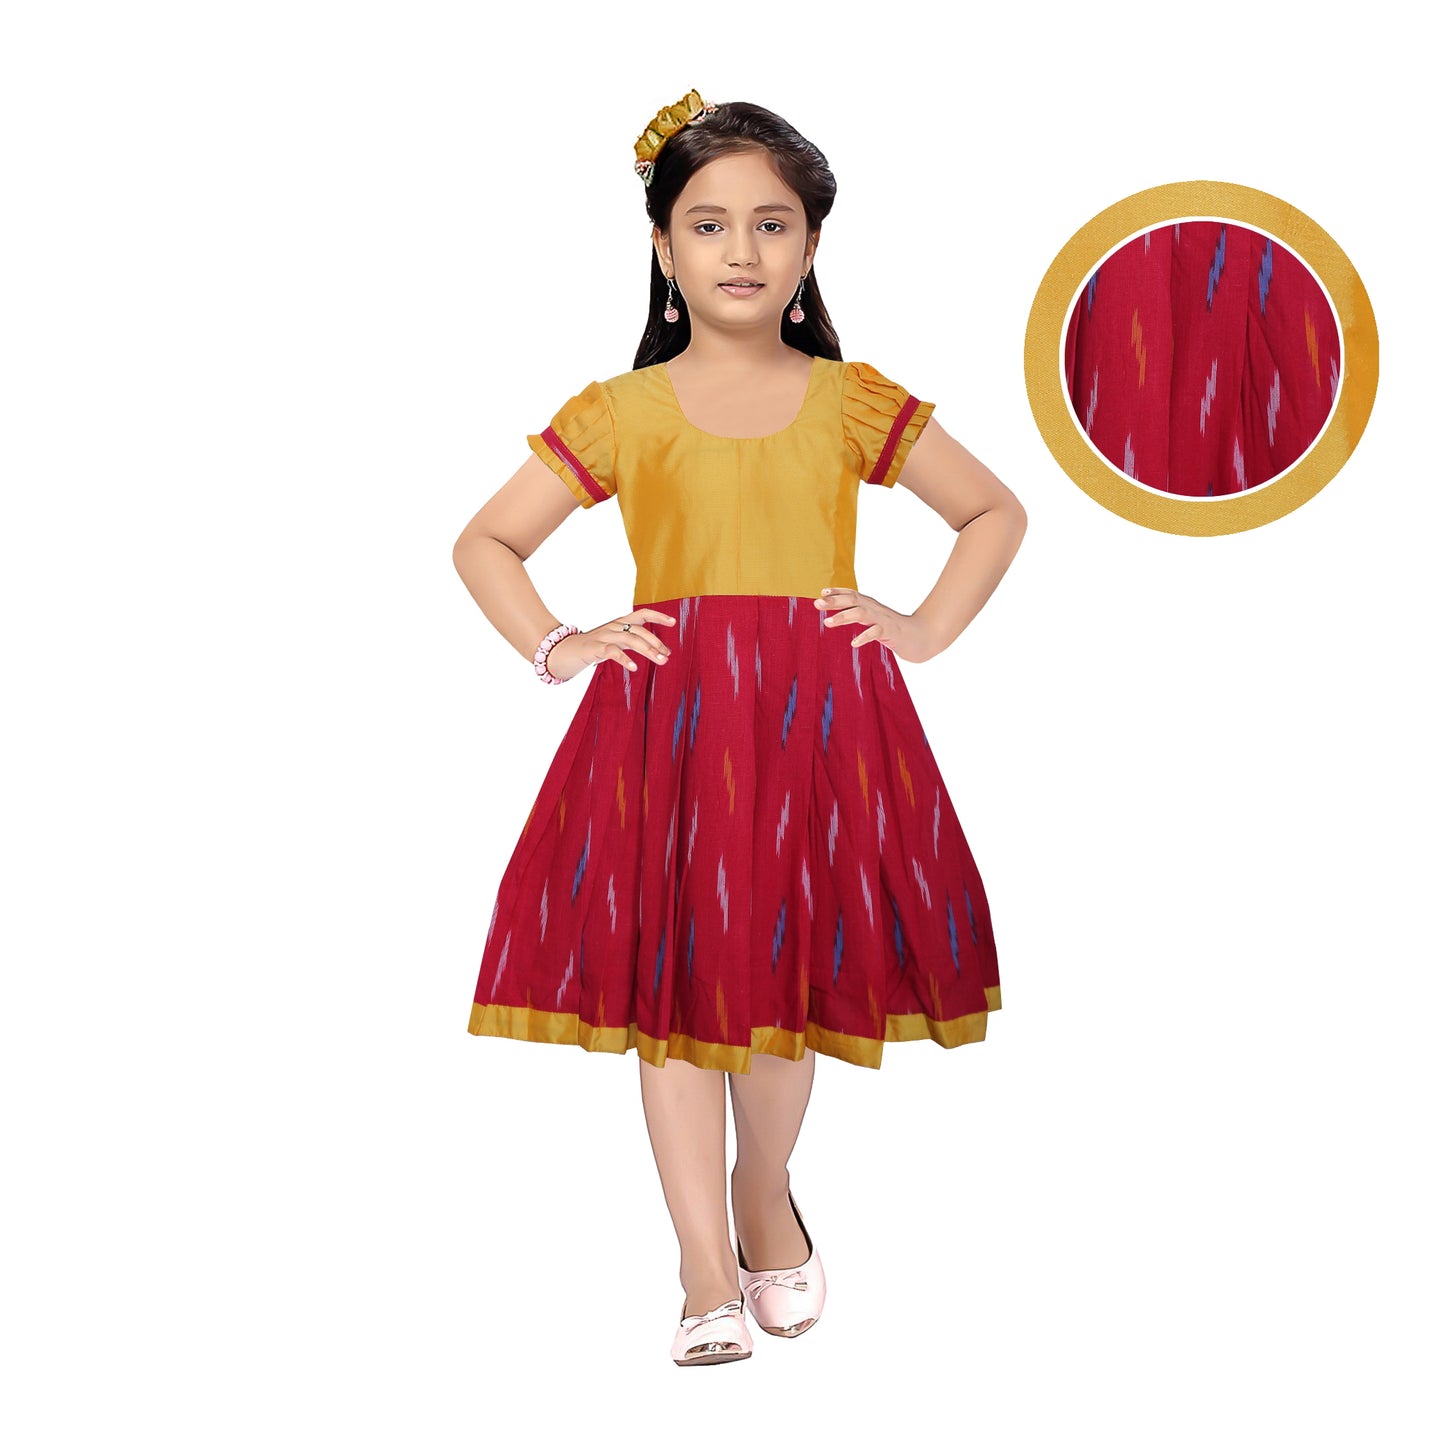 Trendy Yellow with Red ikat frock for babies